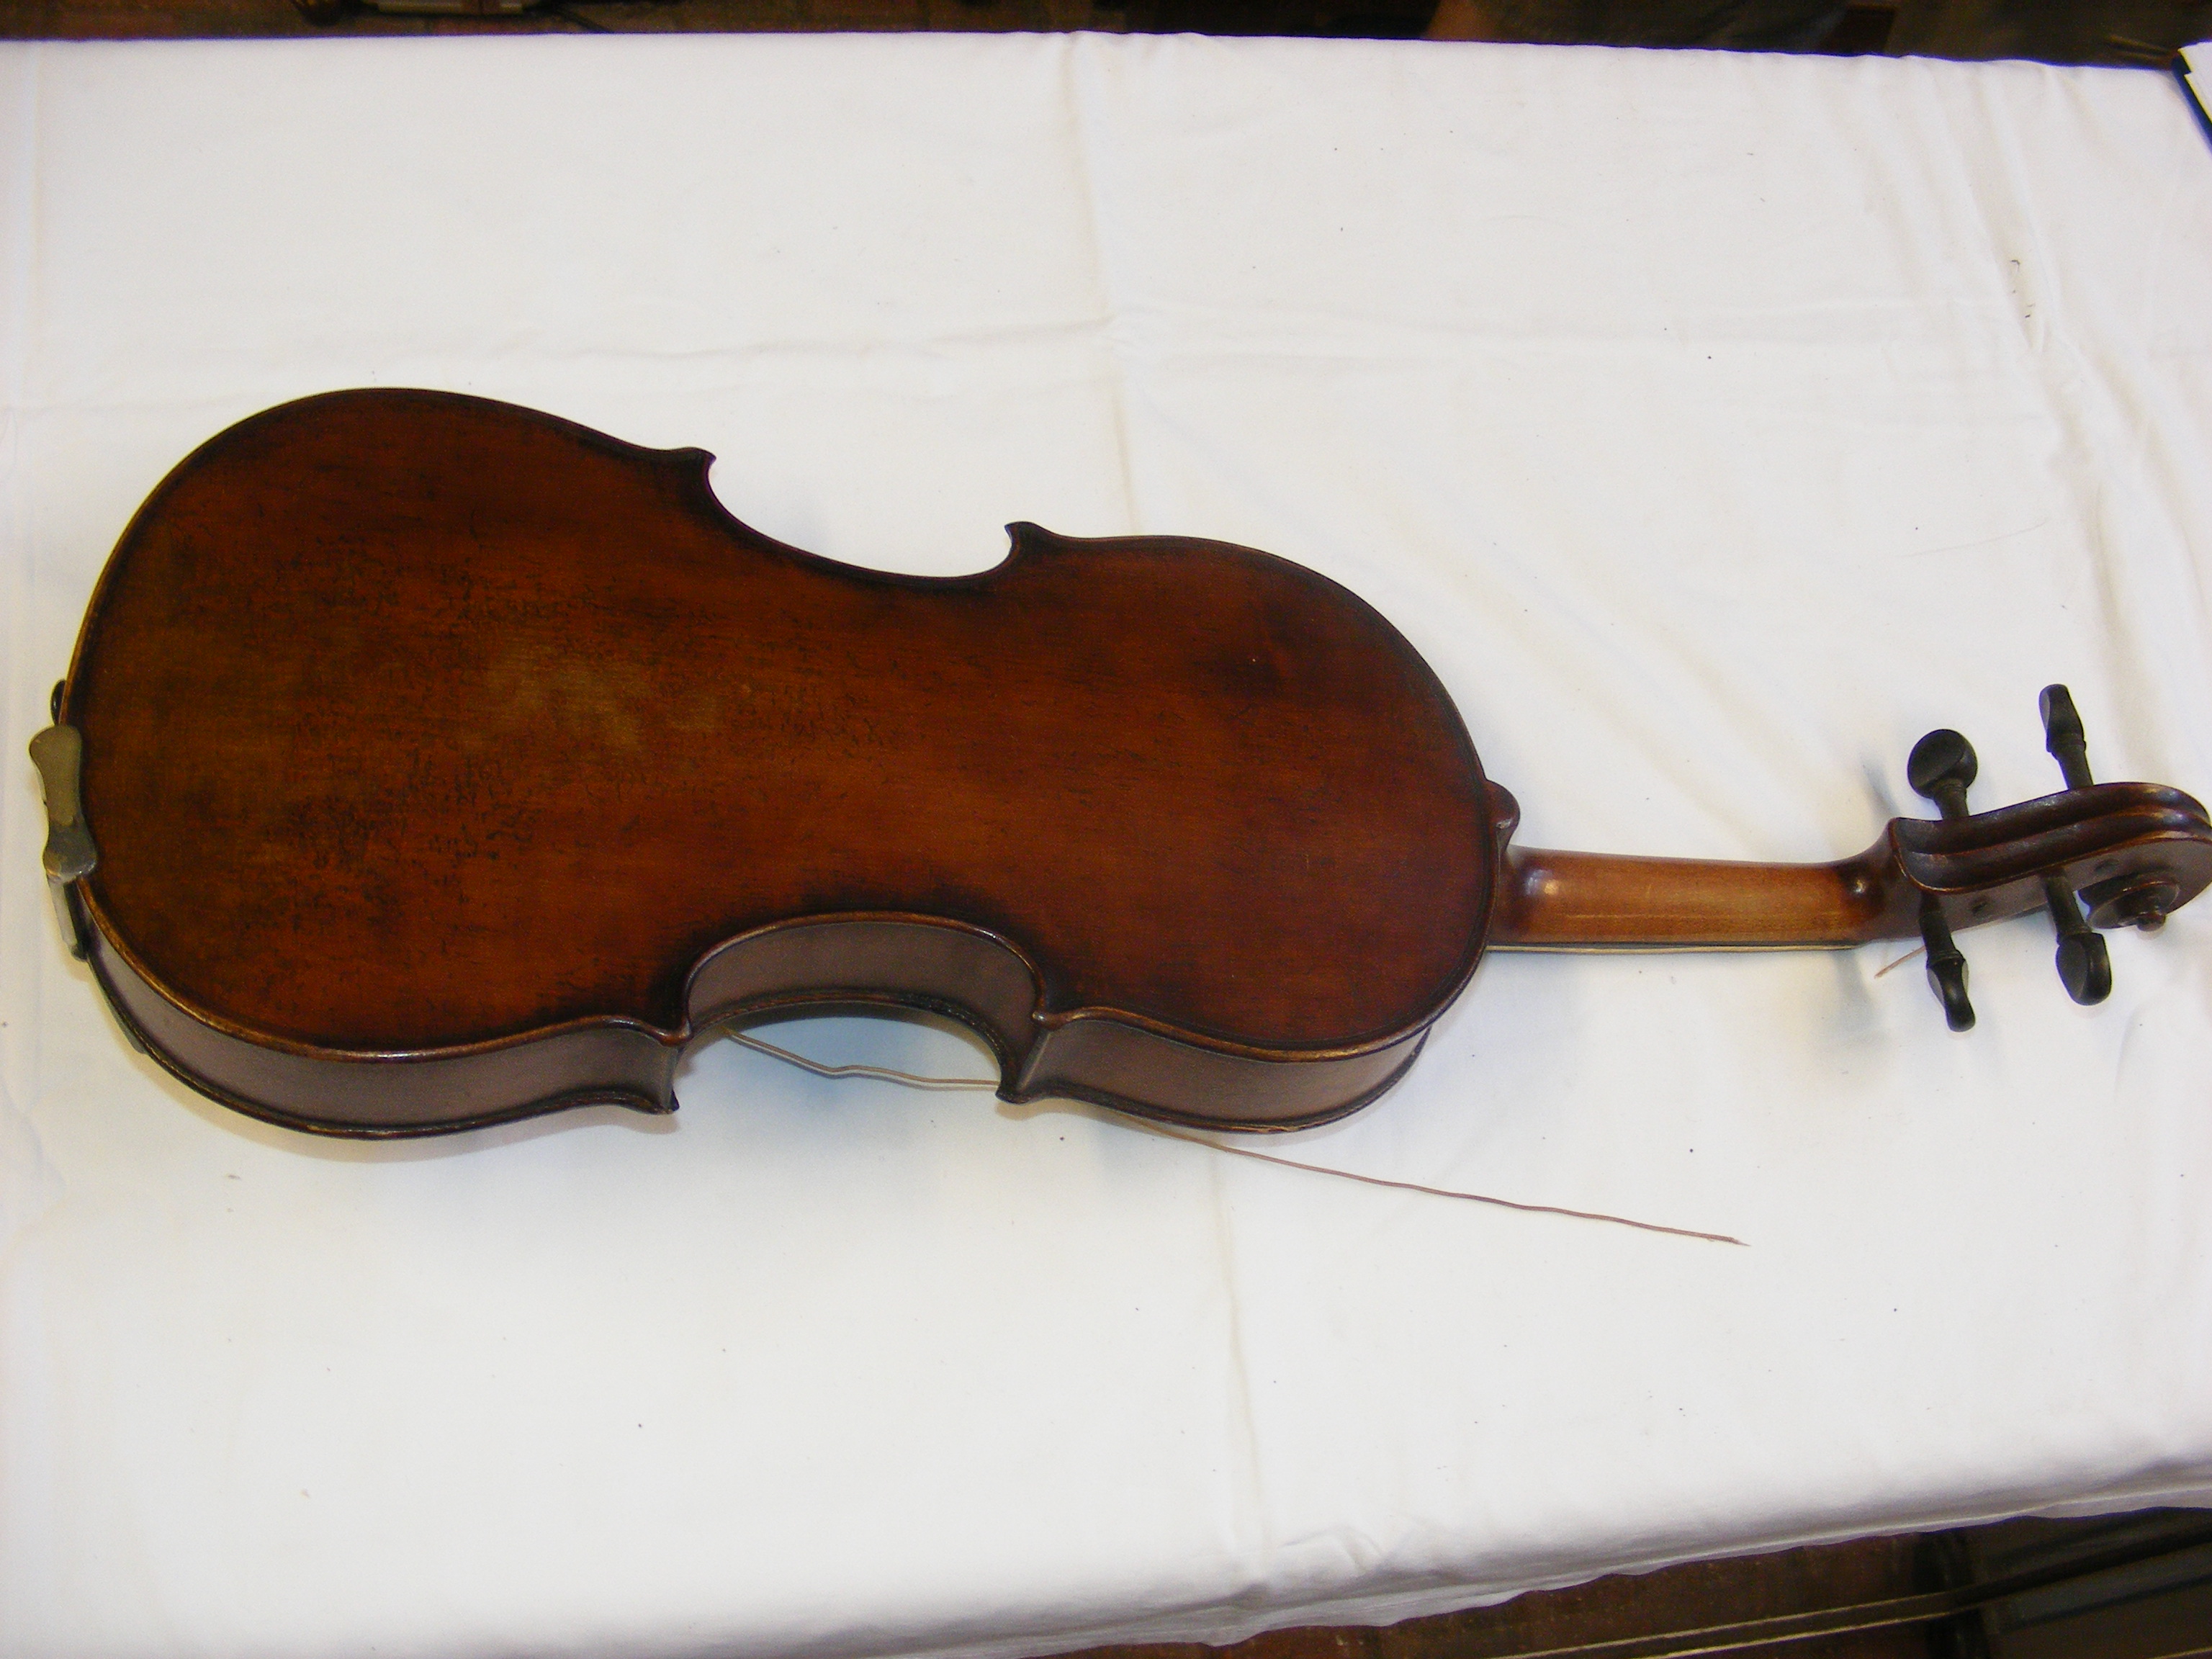 An antique violin with Andreas Guarnerius label, t - Image 24 of 27